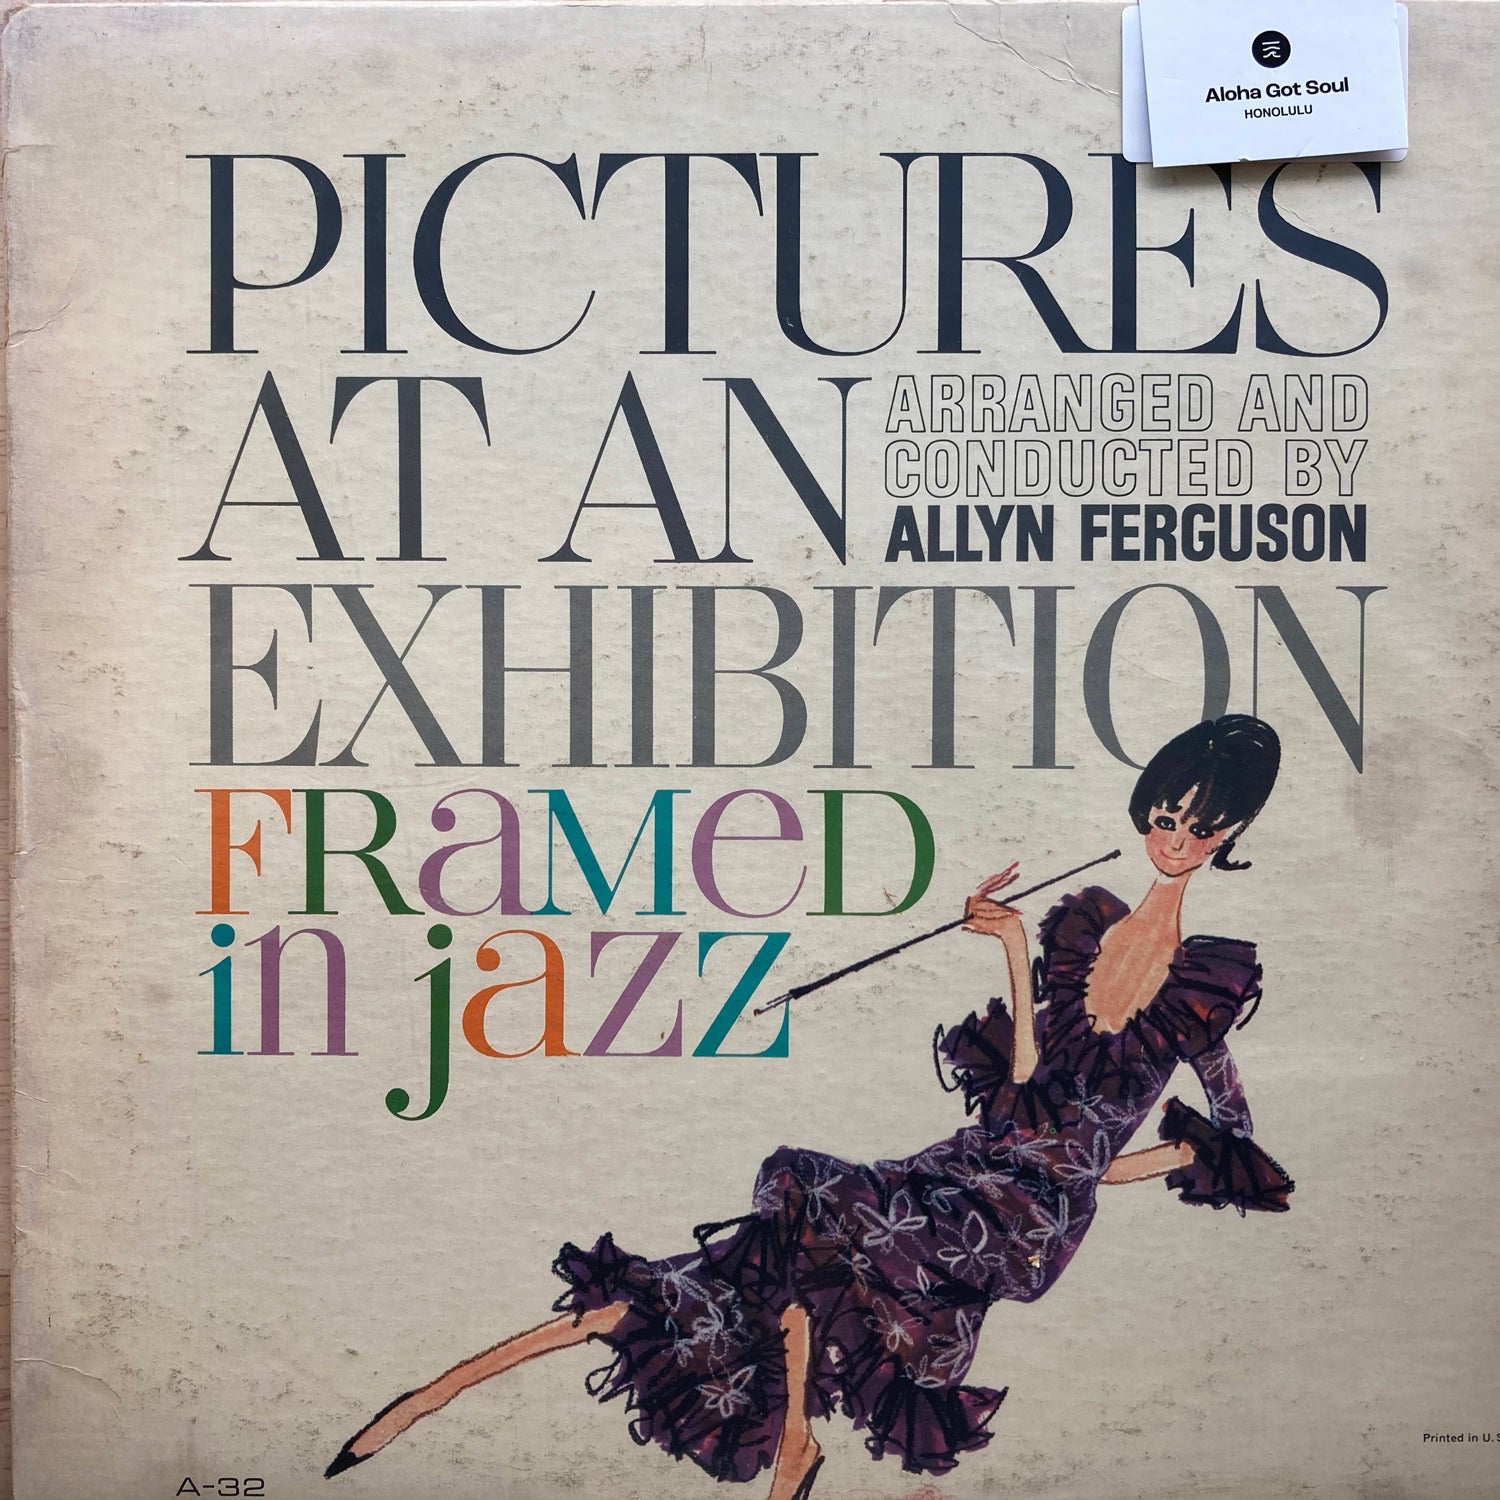 Allyn Ferguson - Pictures at an Exhibition Framed in Jazz